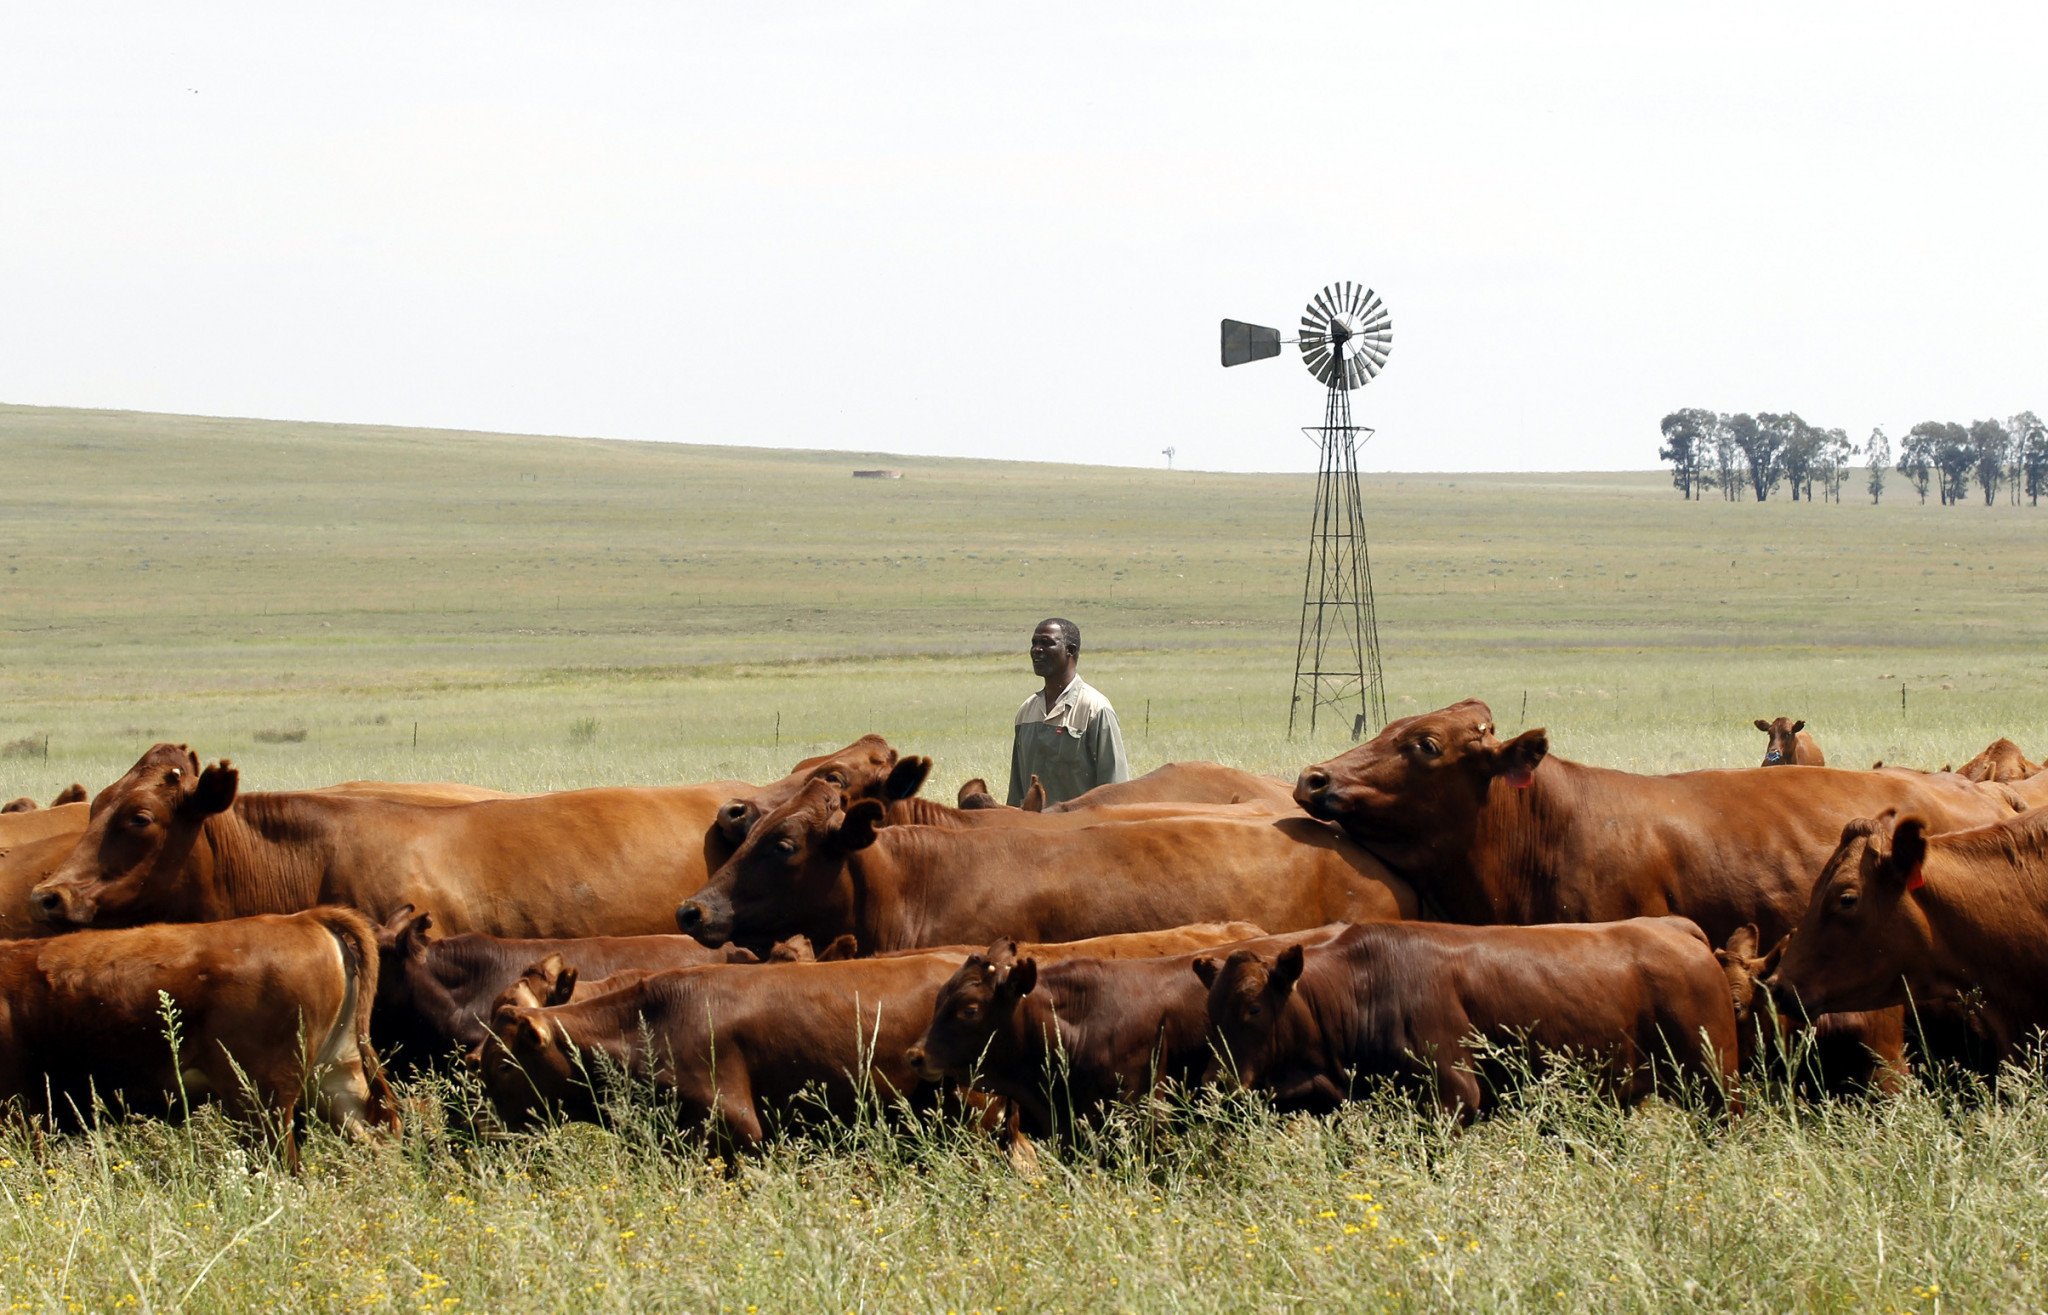 Koos Mthimkhulu, a black cattle-farmer, inspects his herd at his farm in Eastern Free State Province, South Africa, 2012. Mthimkhulu was born on a white-owned farm, and at the end of minority rule in 1994 was selected for a reform program whereby the government bought agricultural land from white farmers and handed it over to blacks with legitimate claims on the territory. Photo: Reuters / Siphiwe Sibeko